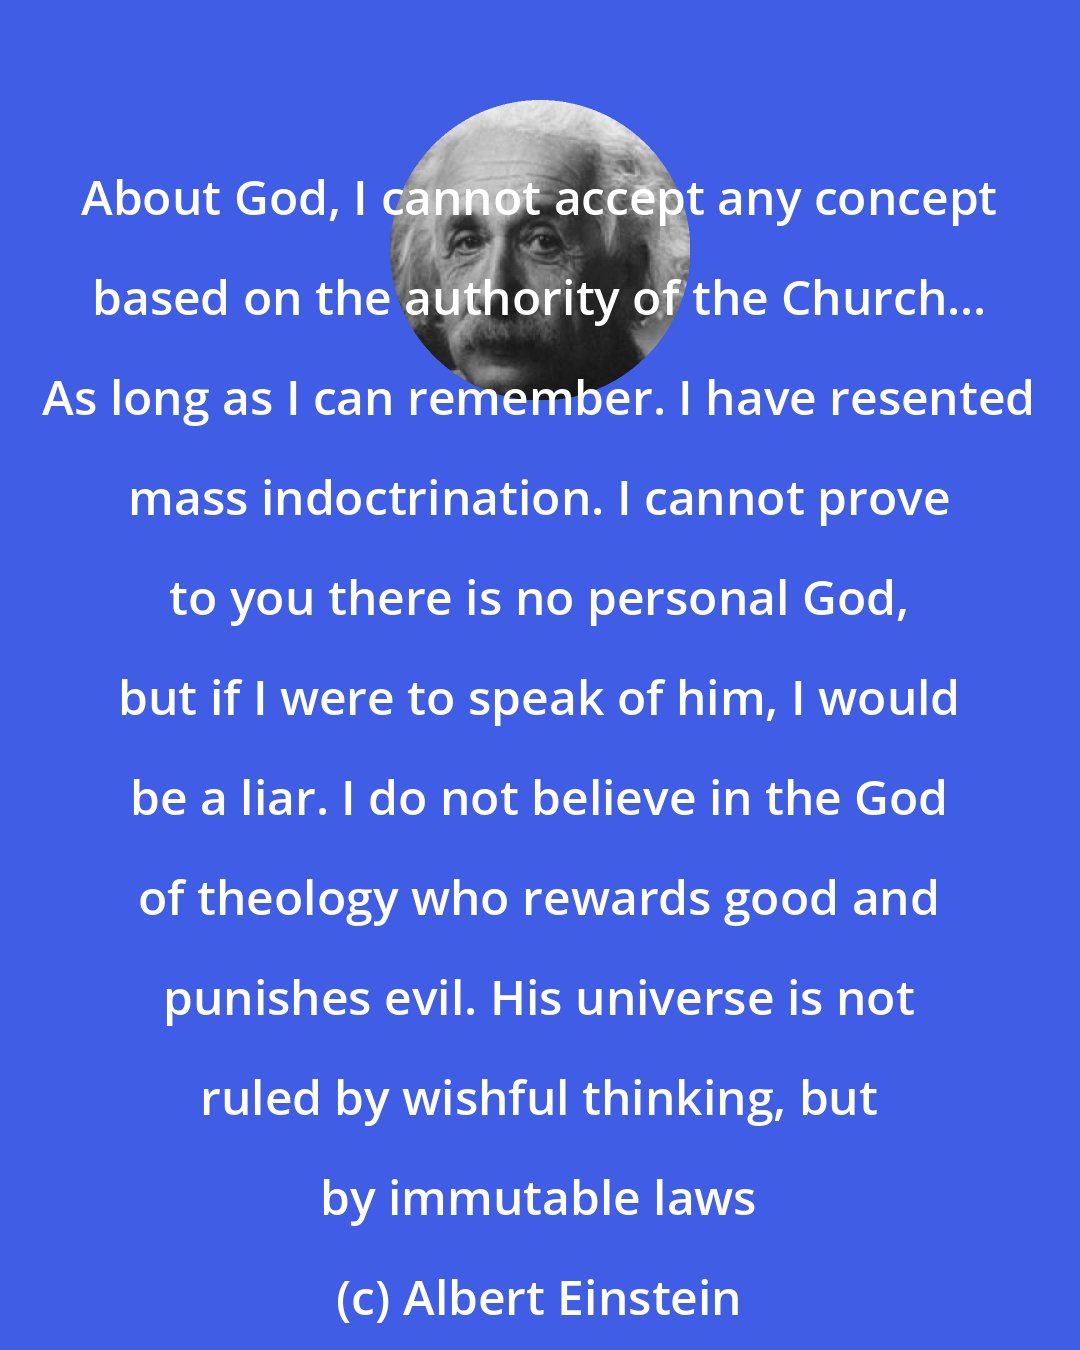 Albert Einstein: About God, I cannot accept any concept based on the authority of the Church... As long as I can remember. I have resented mass indoctrination. I cannot prove to you there is no personal God, but if I were to speak of him, I would be a liar. I do not believe in the God of theology who rewards good and punishes evil. His universe is not ruled by wishful thinking, but by immutable laws